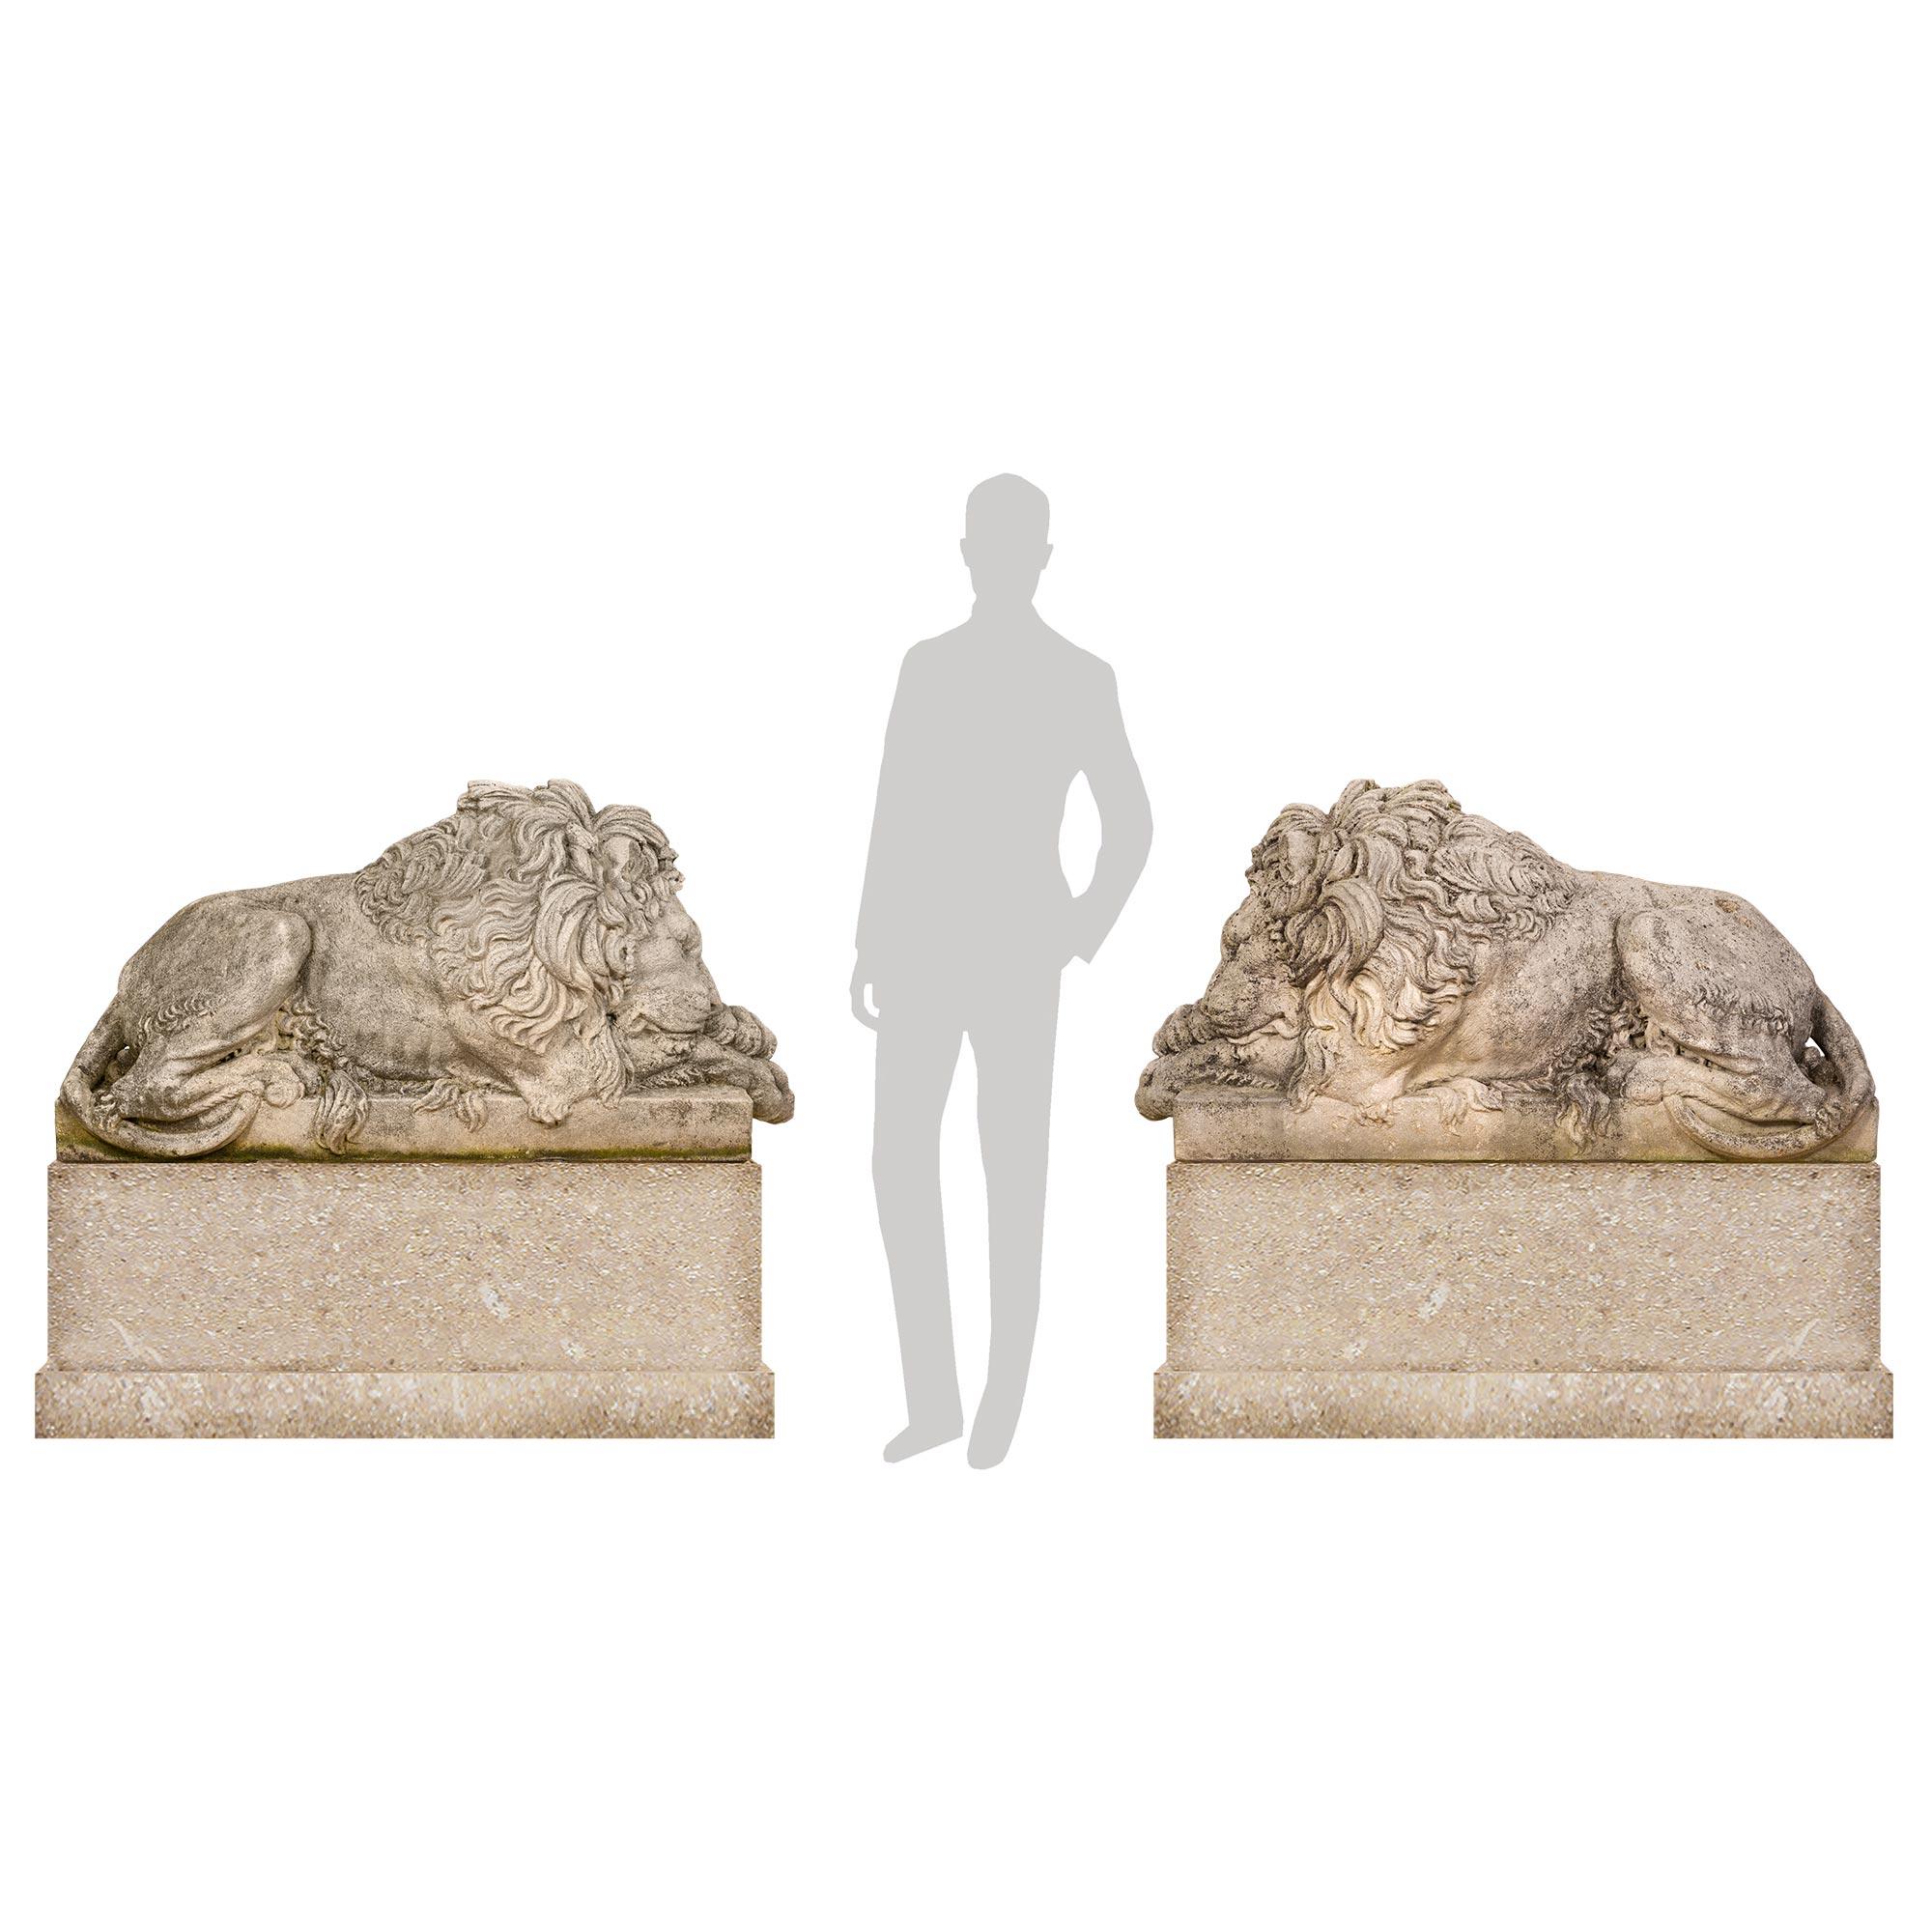 A stunning and most impressive true pair of late 19th century composite stone statues of lions. Each large scale statue is raised by a rectangular base where the handsome wonderfully detailed lions are lying. They each have their paws crossed and